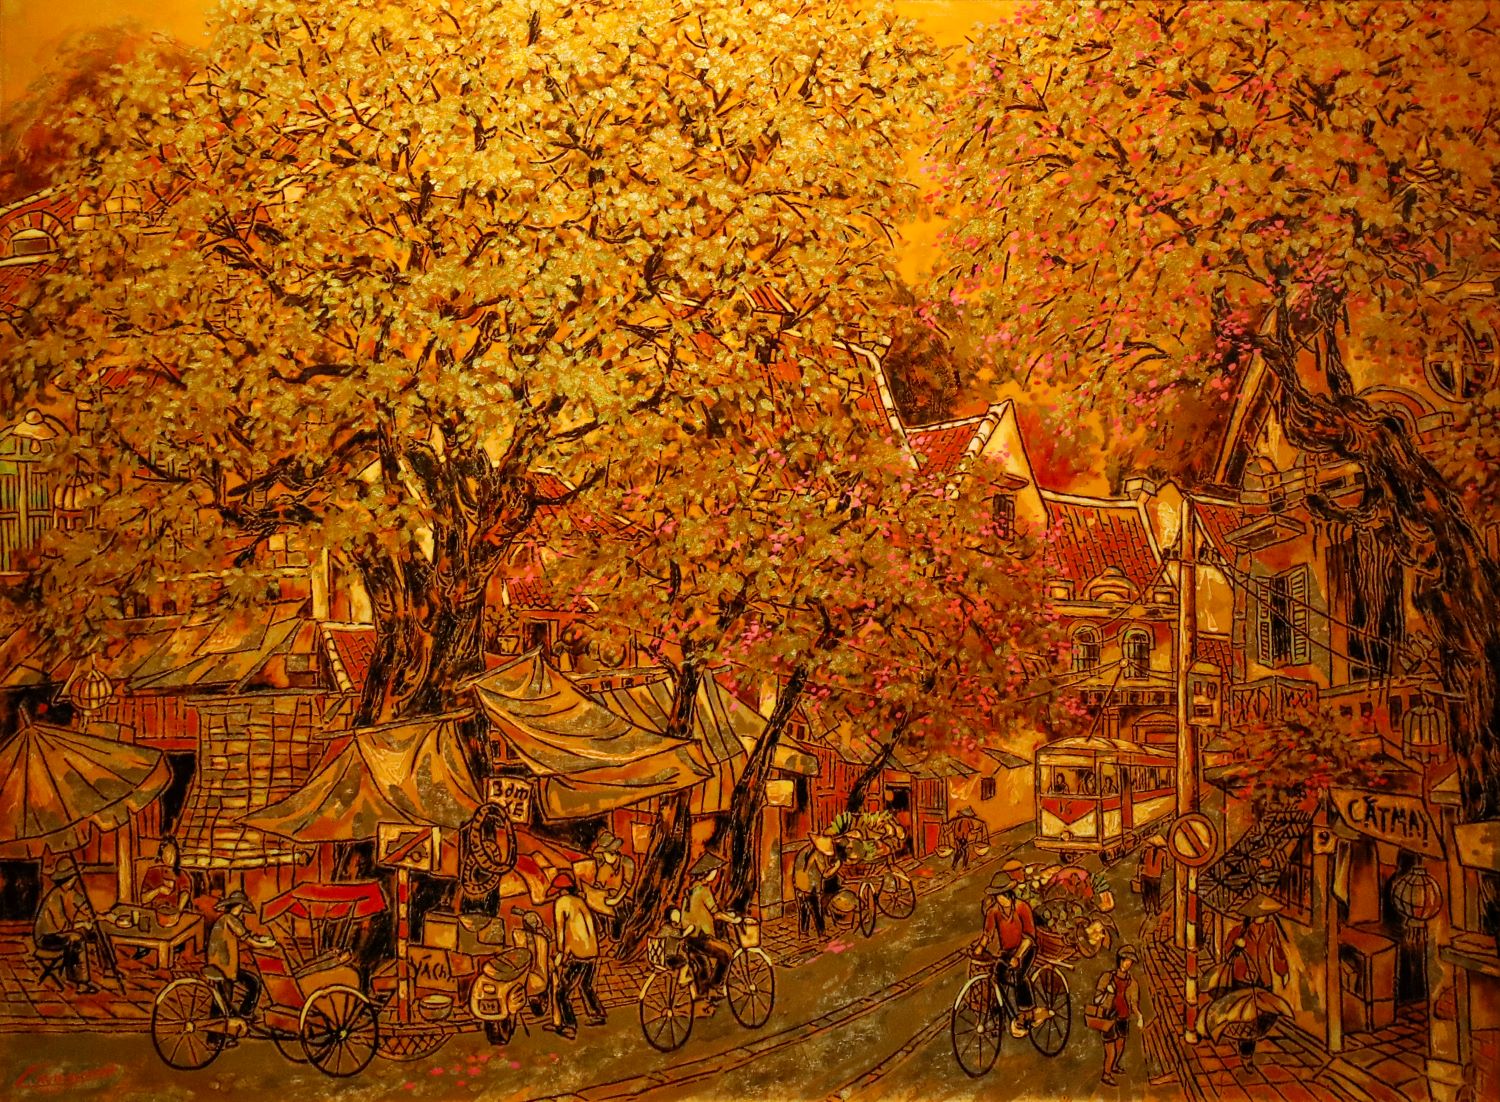 Street in Autumn - Vietnamese Lacquer Painting by Artist Nguyen Hong Giang